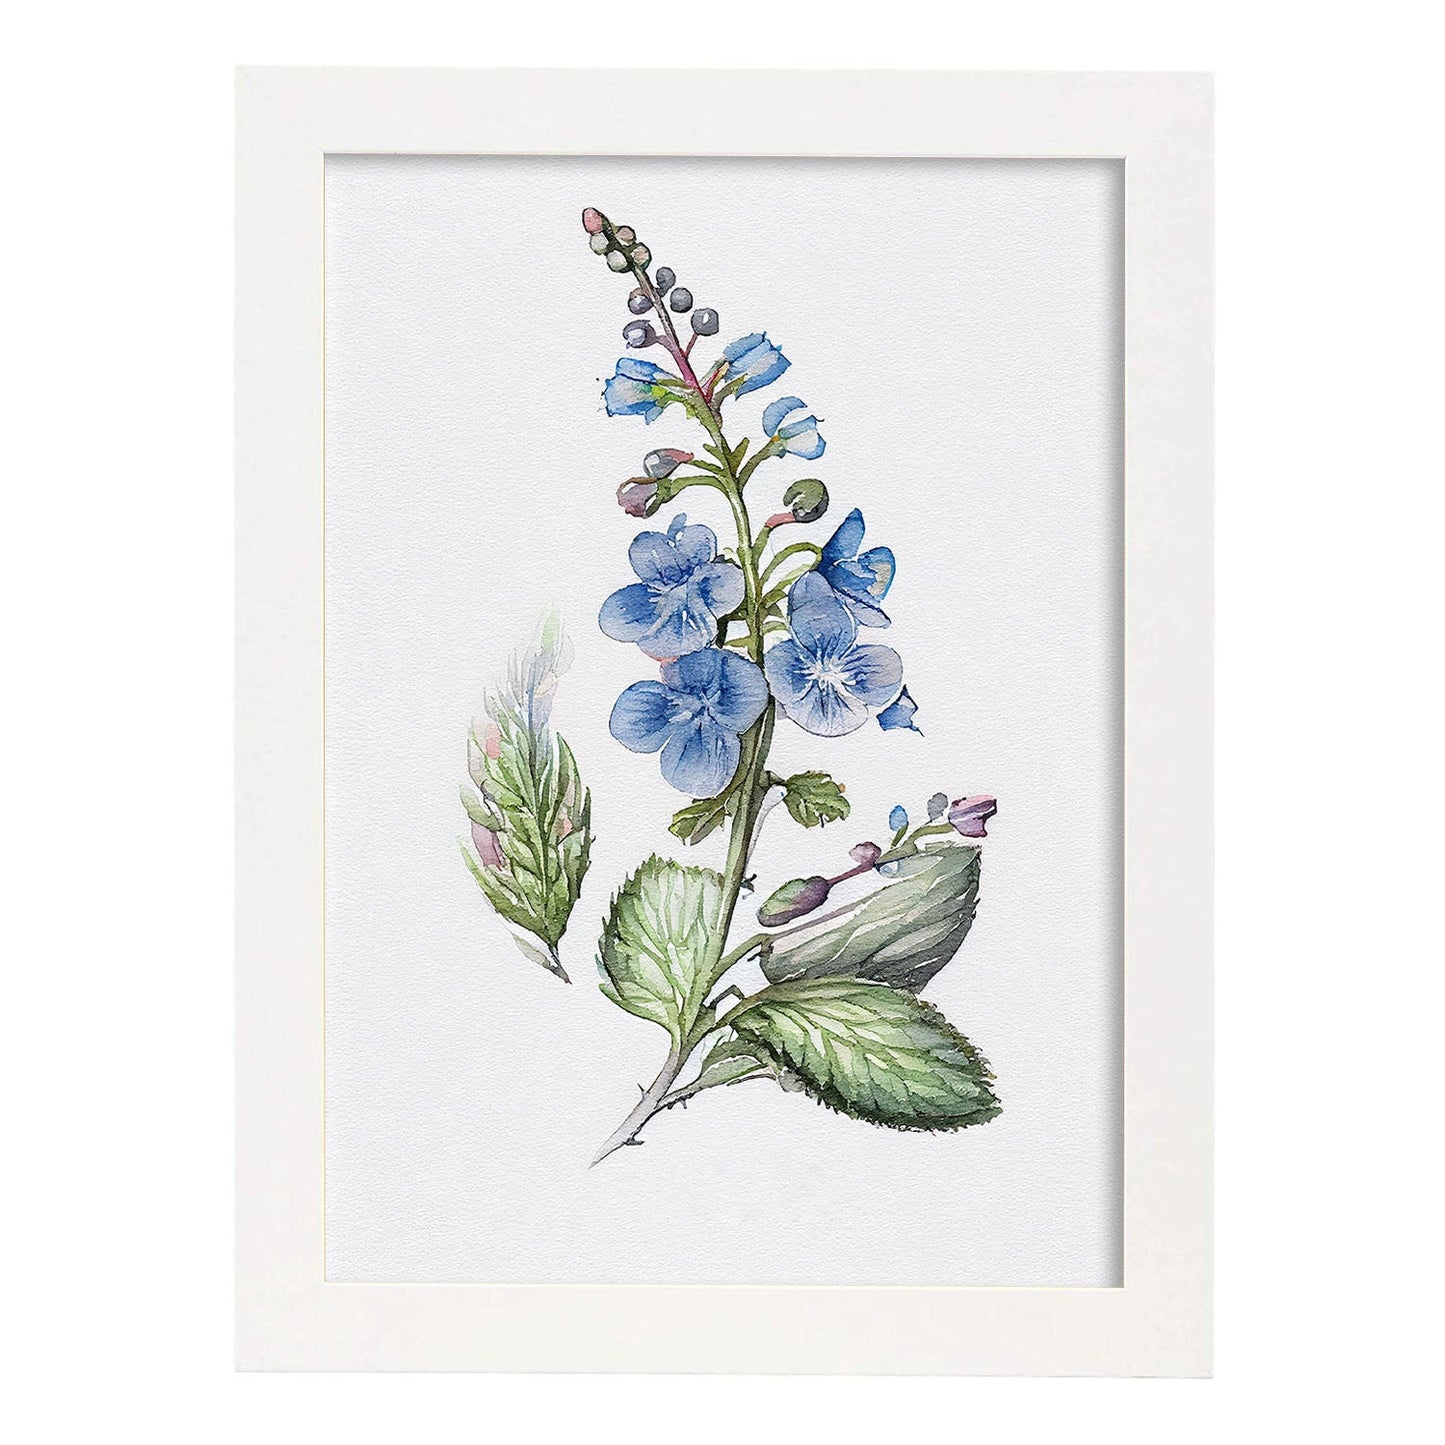 Nacnic watercolor minmal Speedwell_3. Aesthetic Wall Art Prints for Bedroom or Living Room Design.-Artwork-Nacnic-A4-Marco Blanco-Nacnic Estudio SL